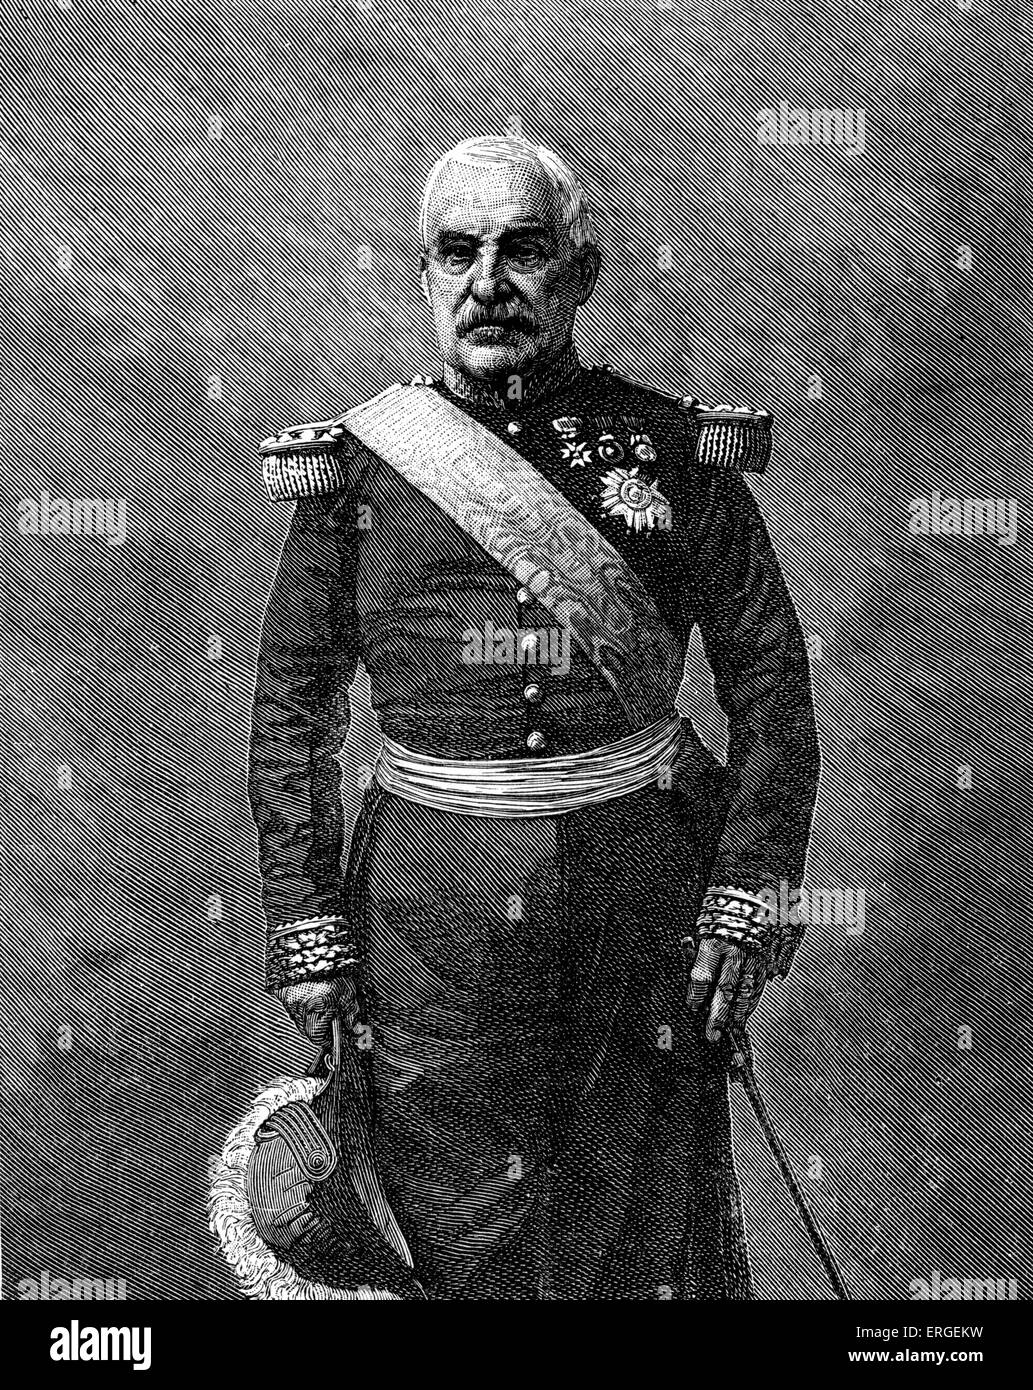 Aimable Pélissier, 1st Duc de Malakoff - portrait. Marshal of France (military distinction), 6 November 1794 - 22 May 1864. Stock Photo